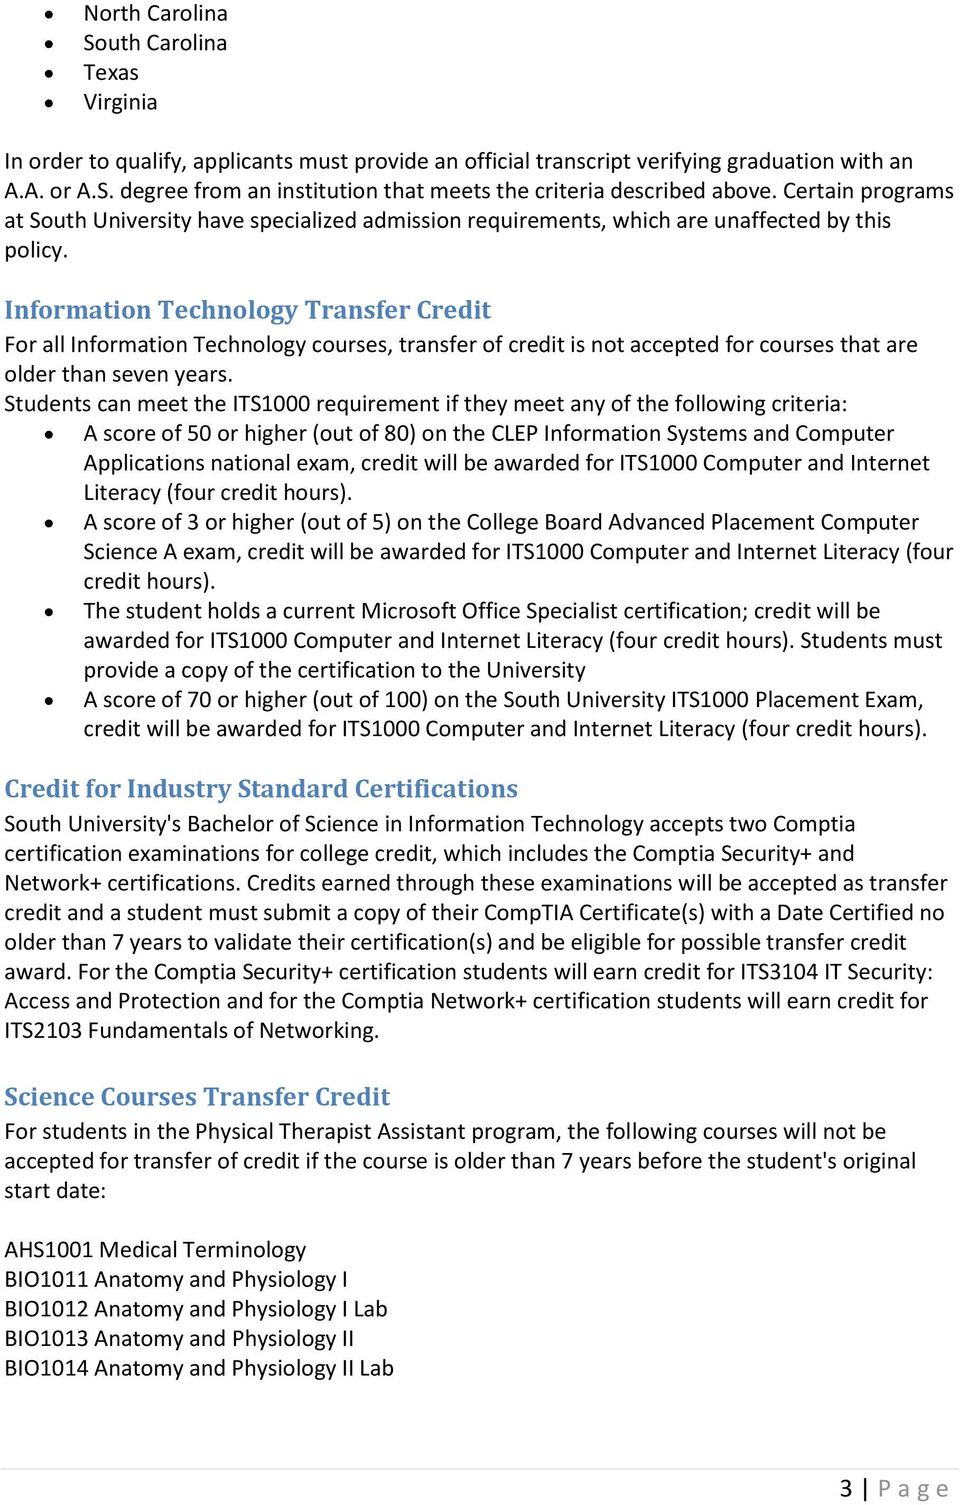 Information Technology Transfer Credit For all Information Technology courses, transfer of credit is not accepted for courses that are older than seven years.